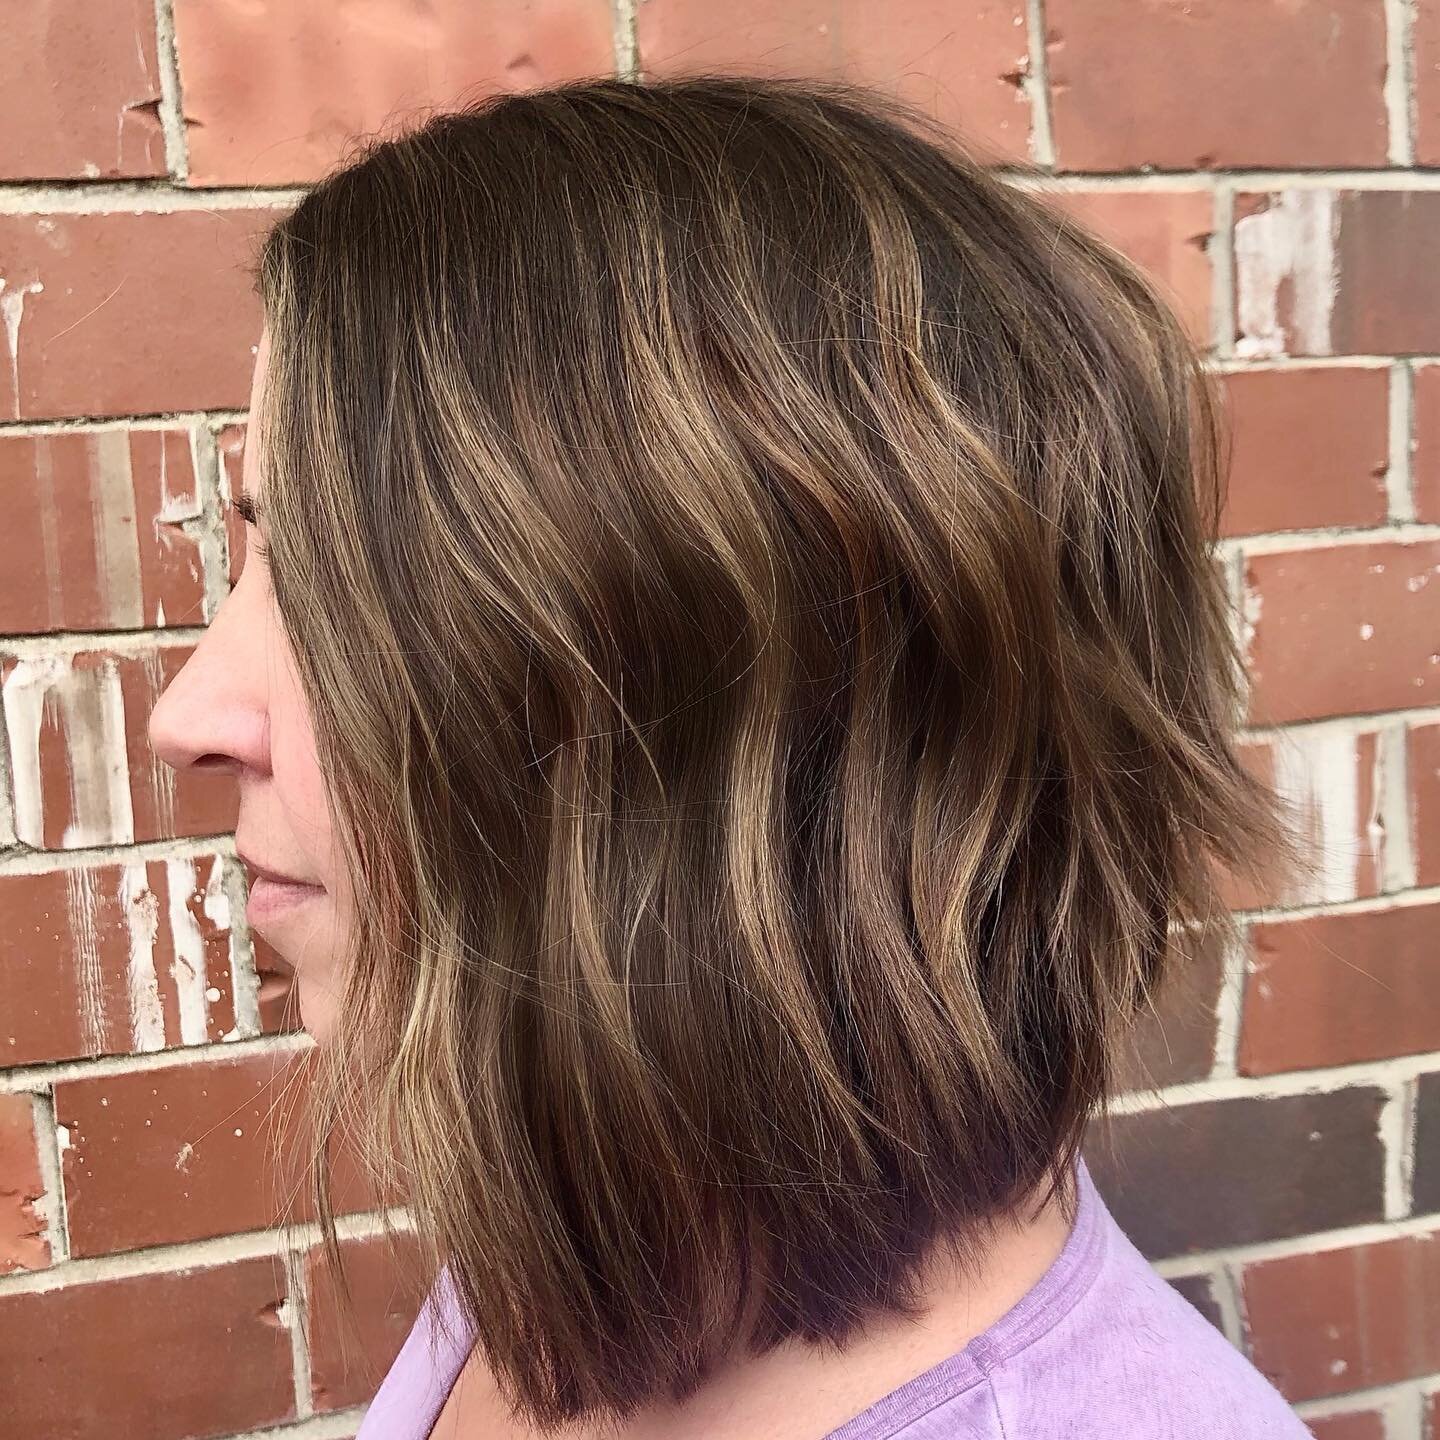 Textured Bob on my friend Amiee! We were wanting a lighter, fresher highlight to give her a pop of lightness and dimension and take off some length and weight for an easier summer style.